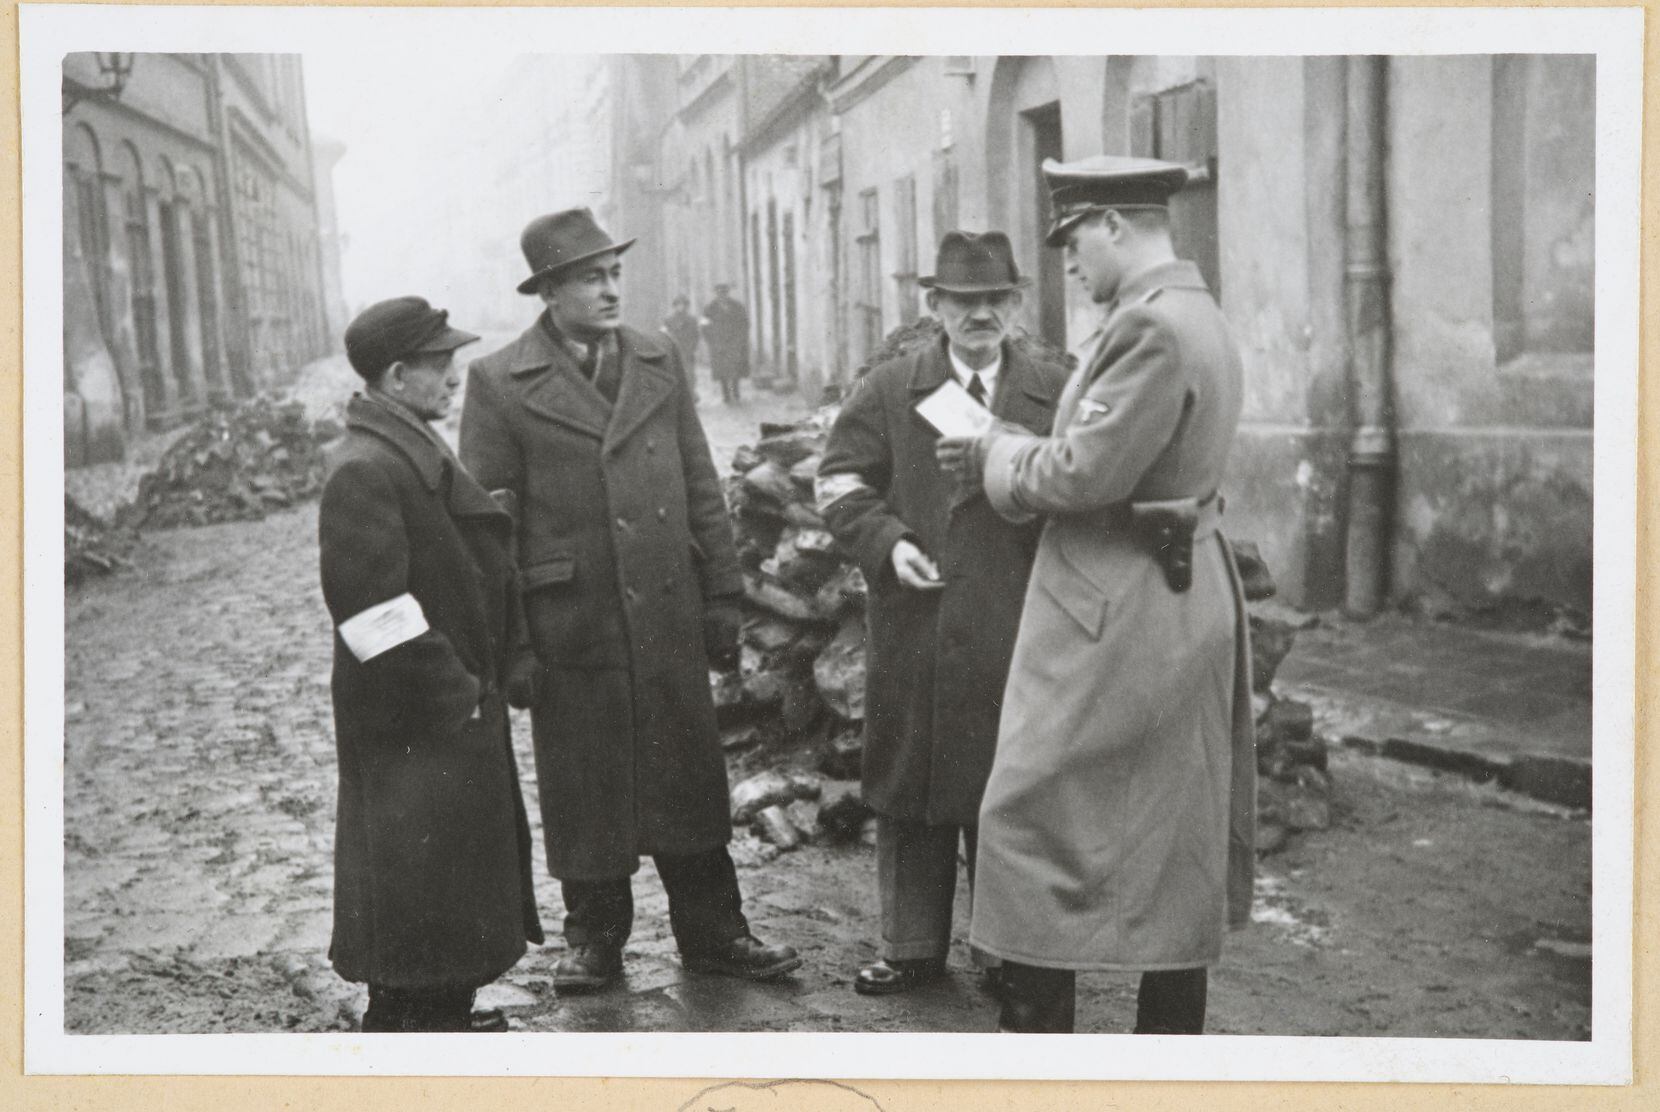 A German policeman checks the identification of Jewish people in the Krakow ghetto during...